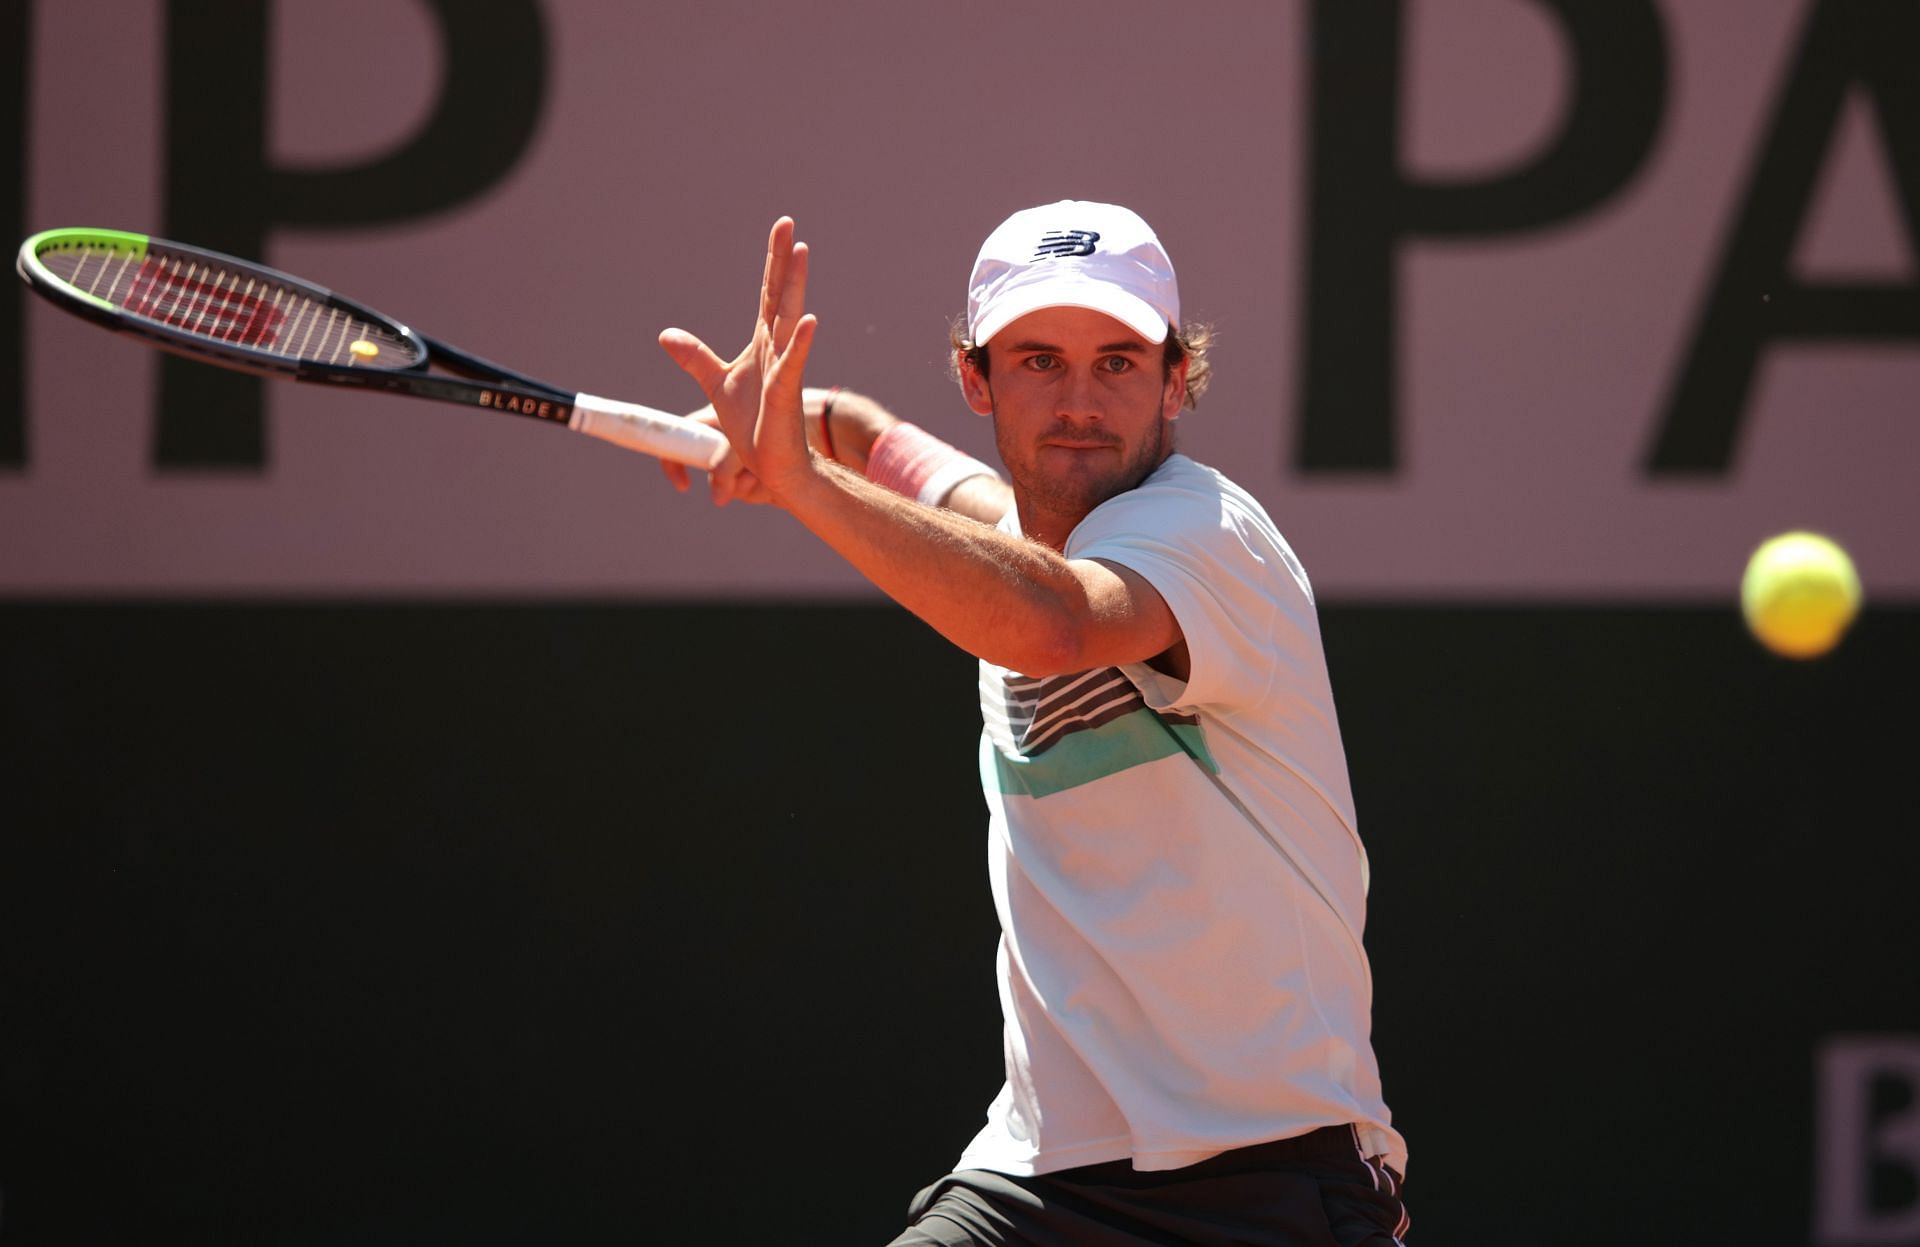 Paul in action at the 2021 French Open.